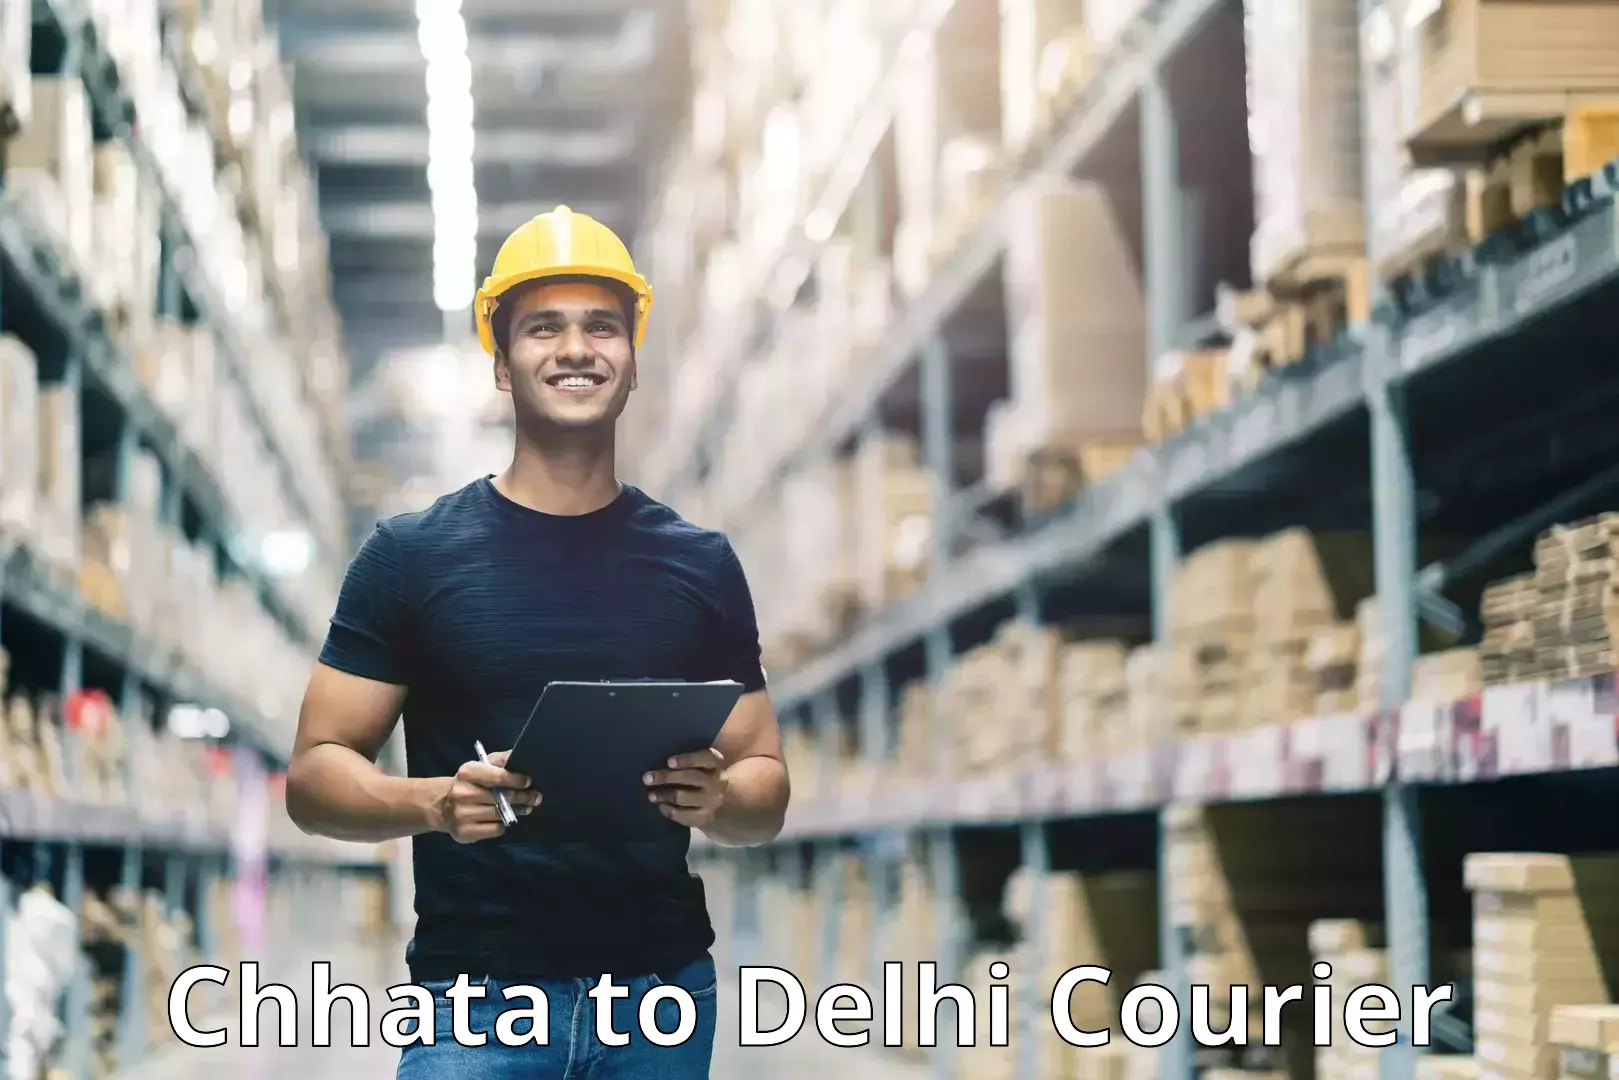 Efficient order fulfillment in Chhata to Lodhi Road